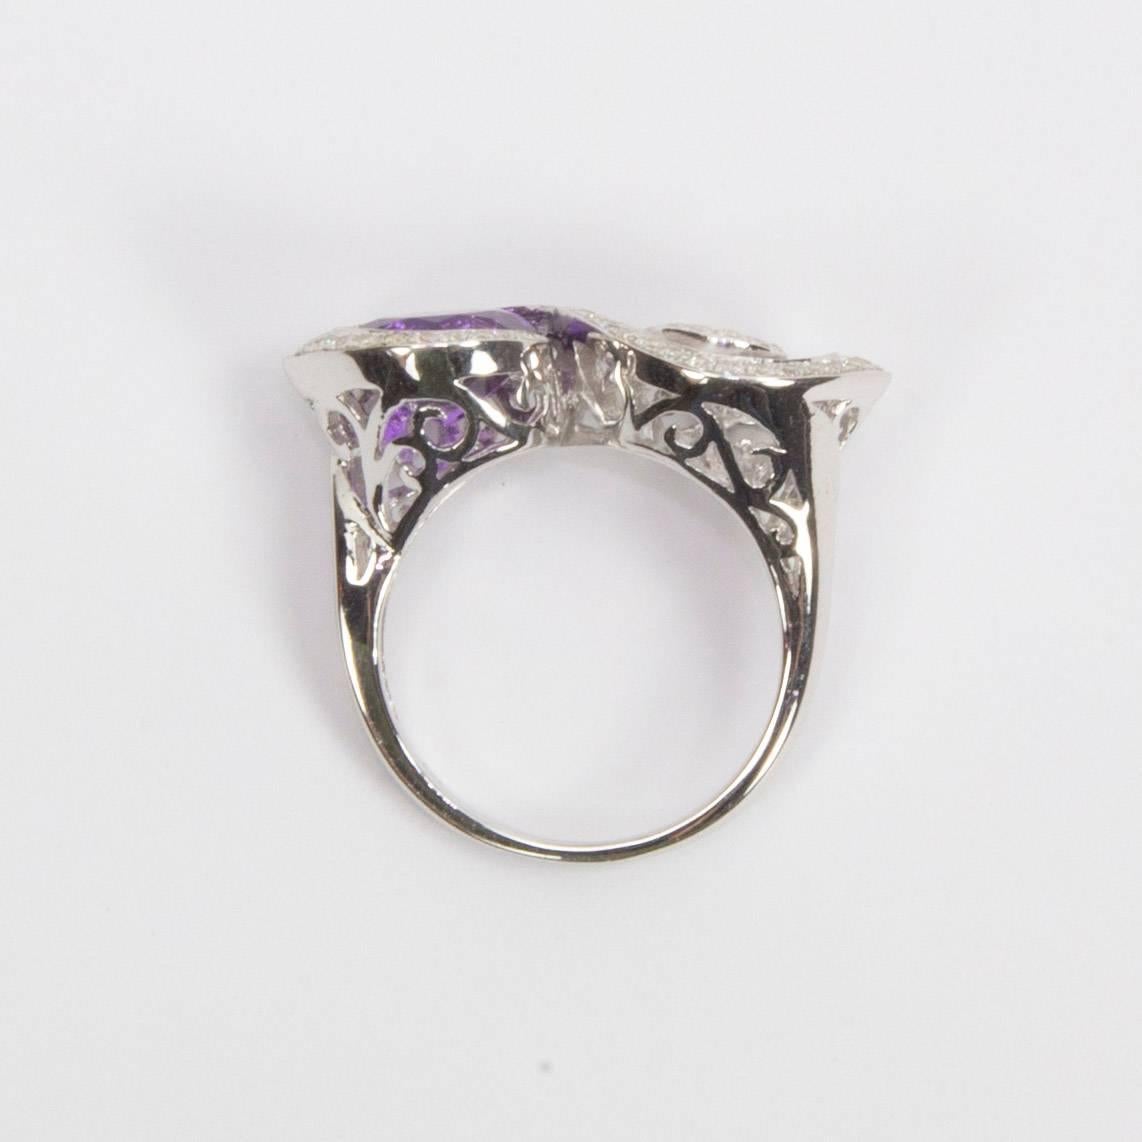 Beautiful Toi et Moi Crossover Swirl design Ring with an Amethyst surrounded by a bounty of glistening Cubic Zirconium; beautiful open gallery; Size 7.5 can be resized on request. Add Pizazz to any outfit!